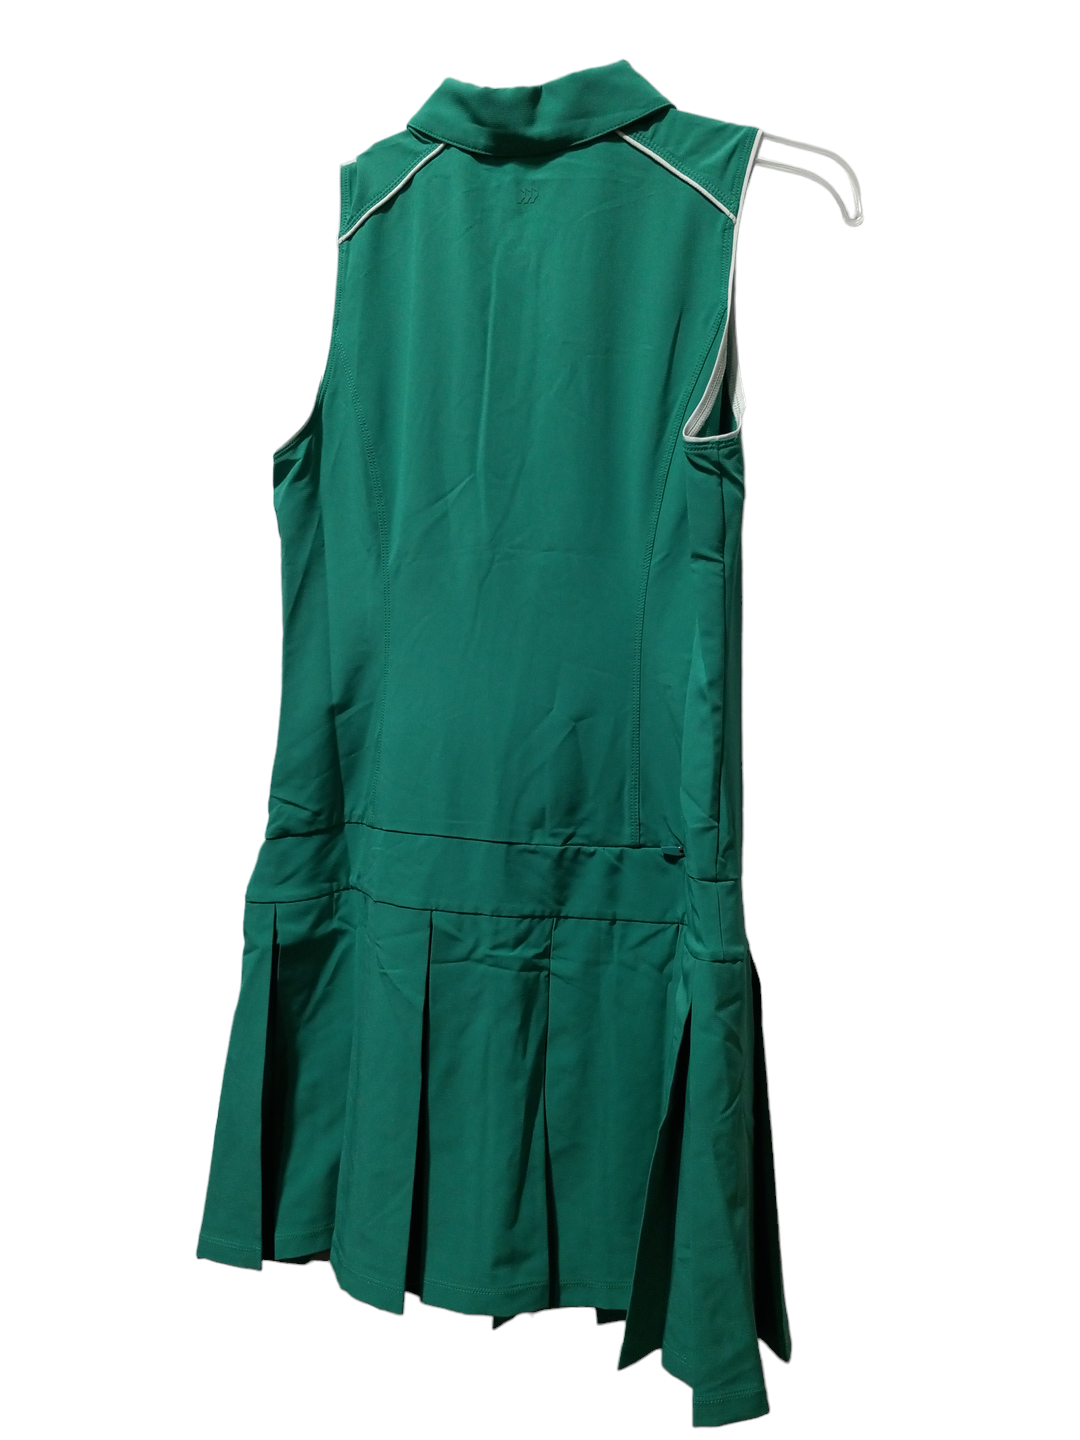 Green Athletic Dress All In Motion, Size S